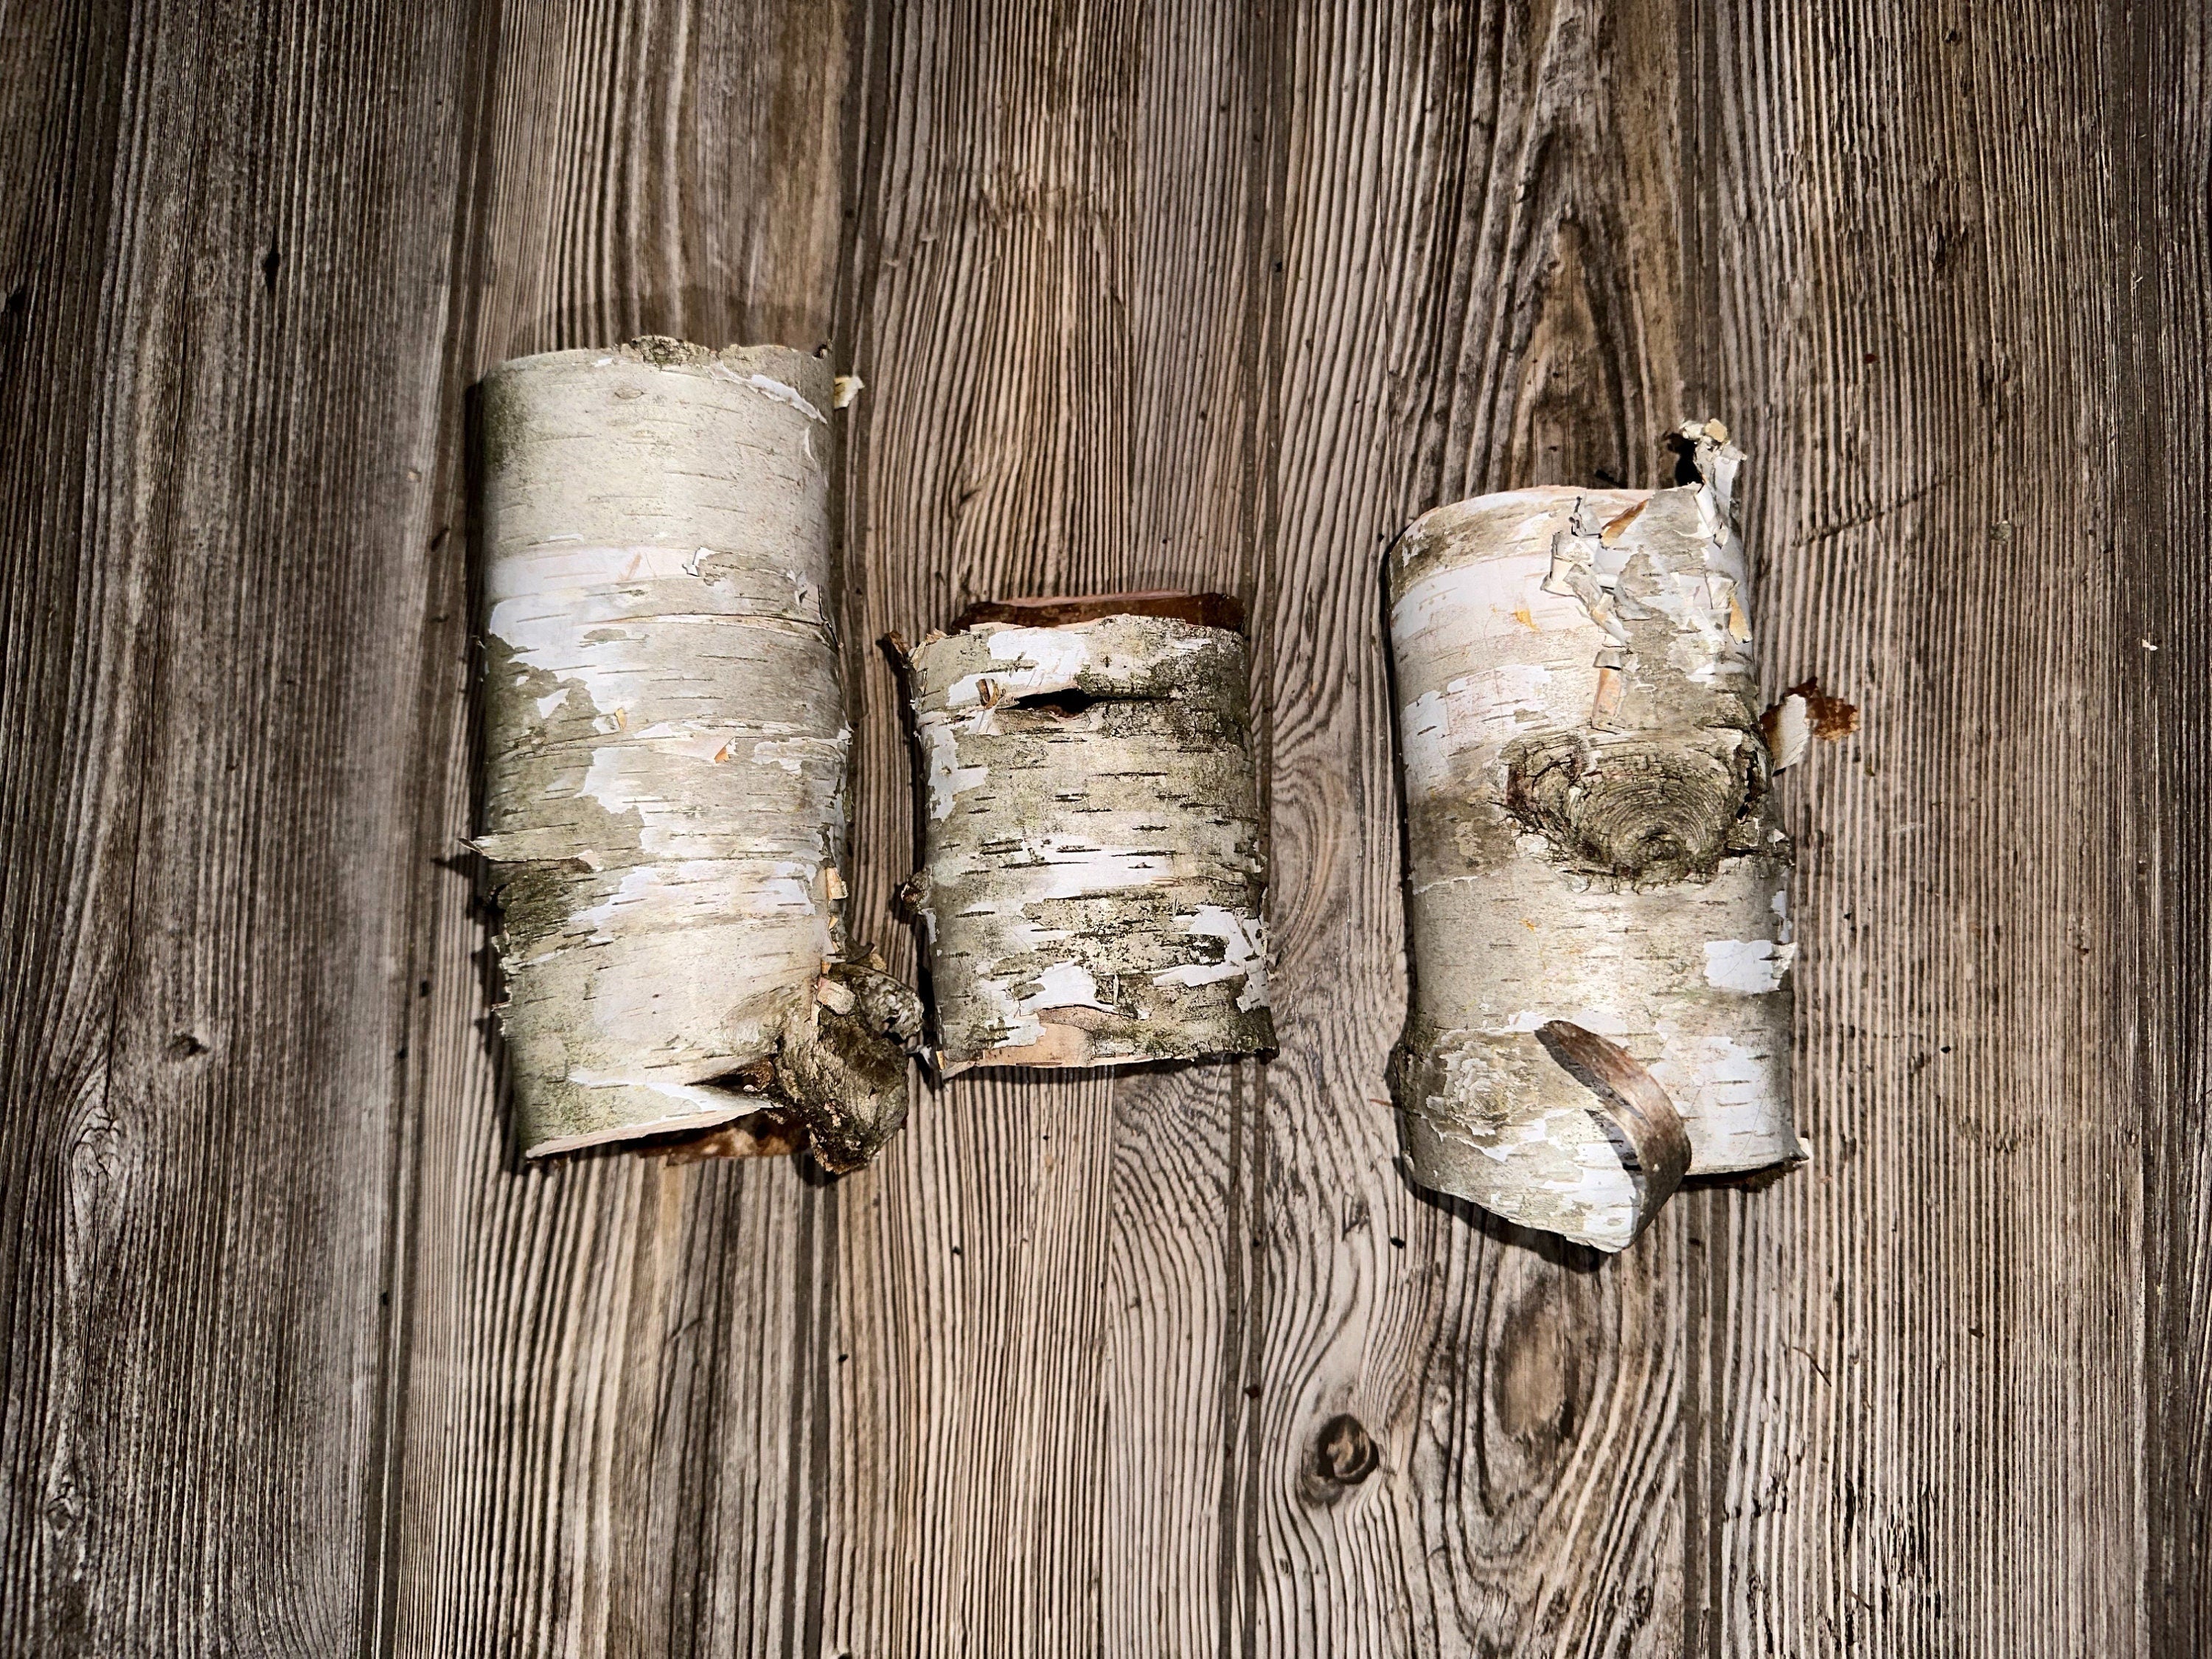 Three White Birch Bark Tubes, Approximately 4.5-7.5 Inches Long by 3 Inches Wide and 3 Inches High